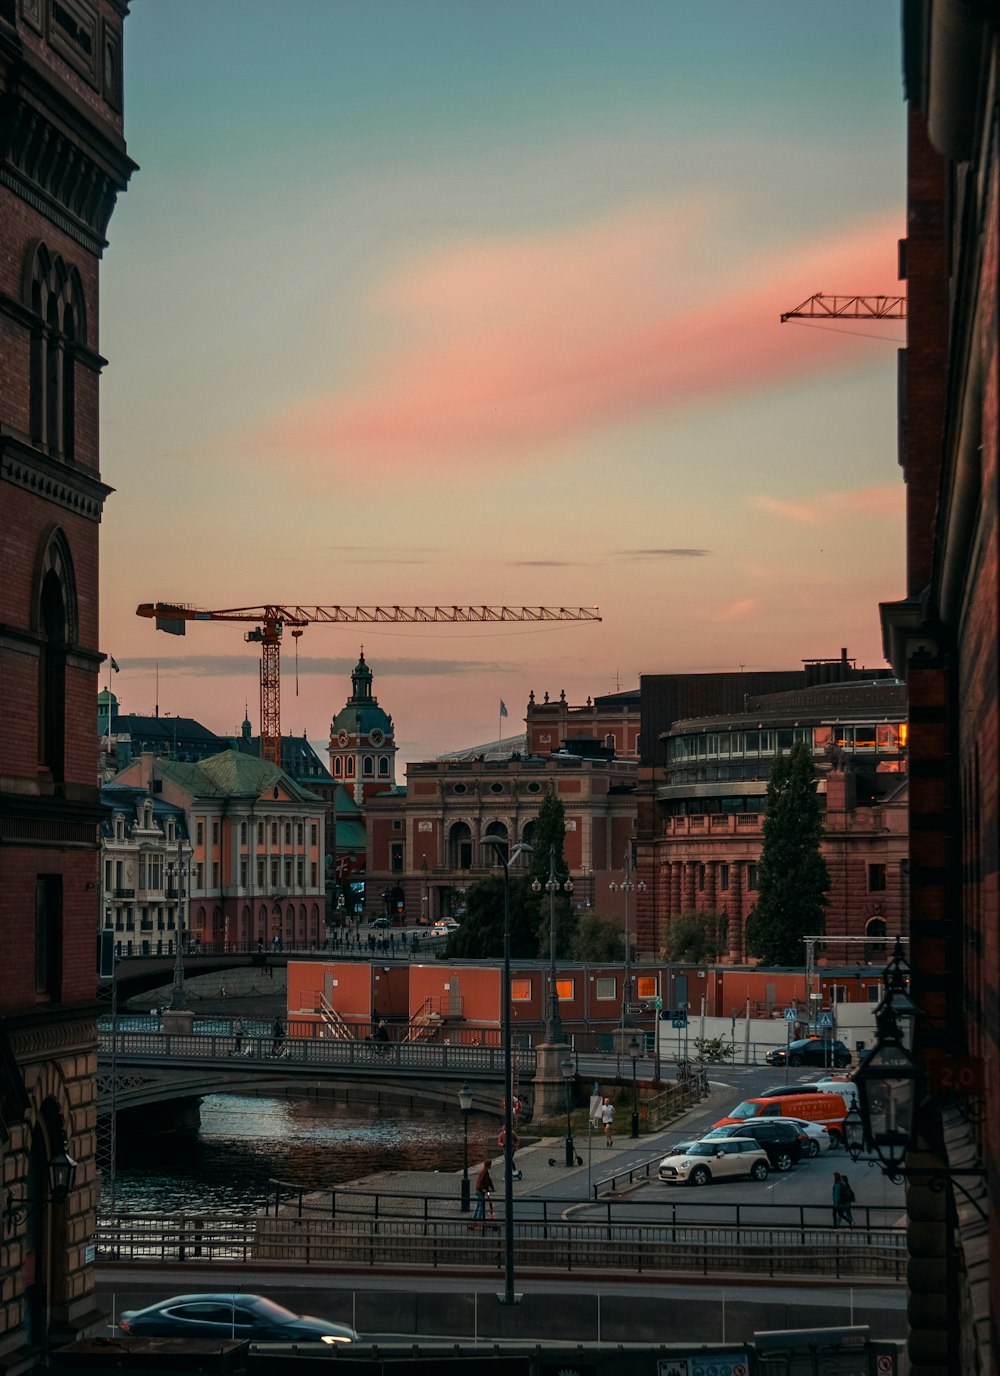 a sunset view of a city with a crane in the background